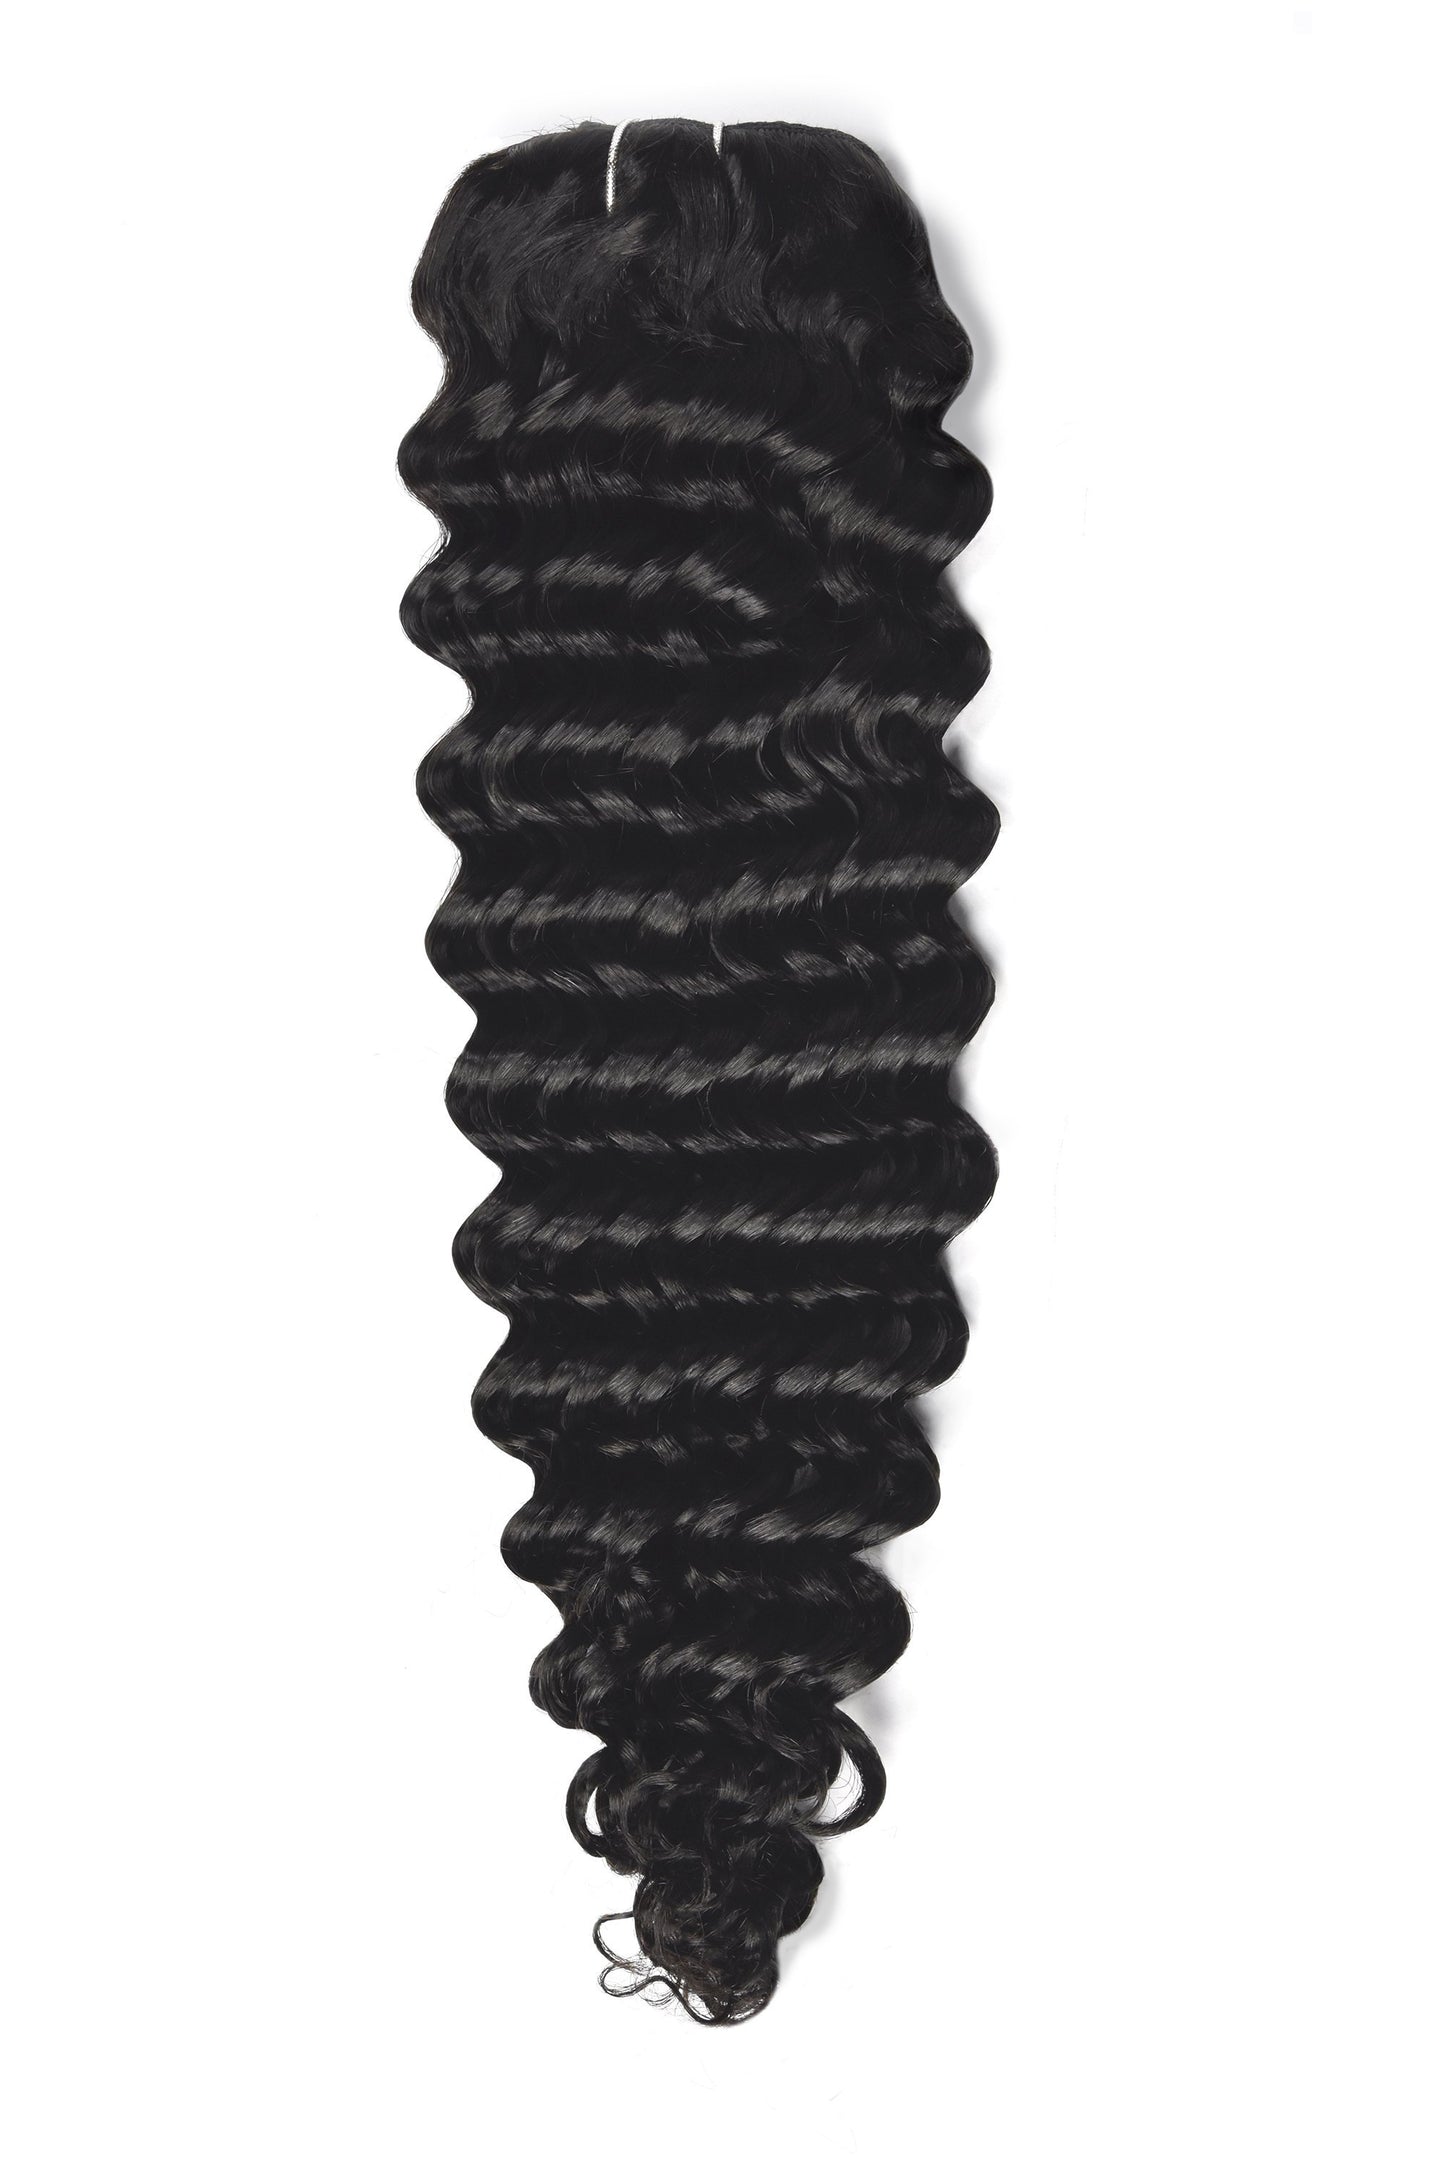 Curly Full Head Remy Clip in Human Hair Extensions - Off/Natural Black (#1B) Curly Clip In Hair Extensions cliphair 